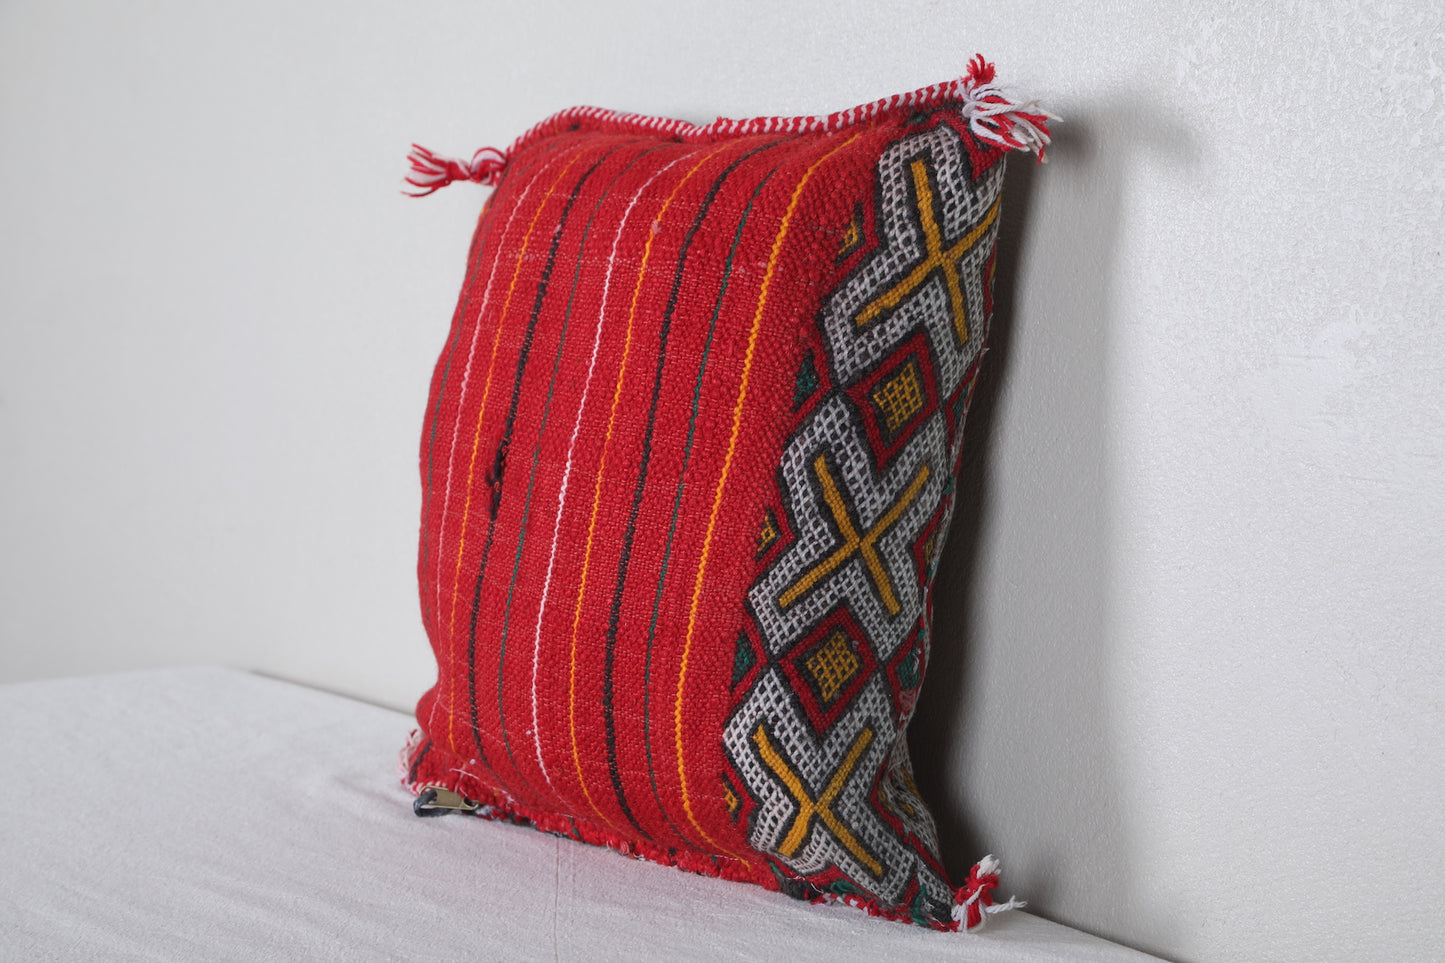 Tribal Moroccan pillow 14.5 INCHES X 15.3 INCHES